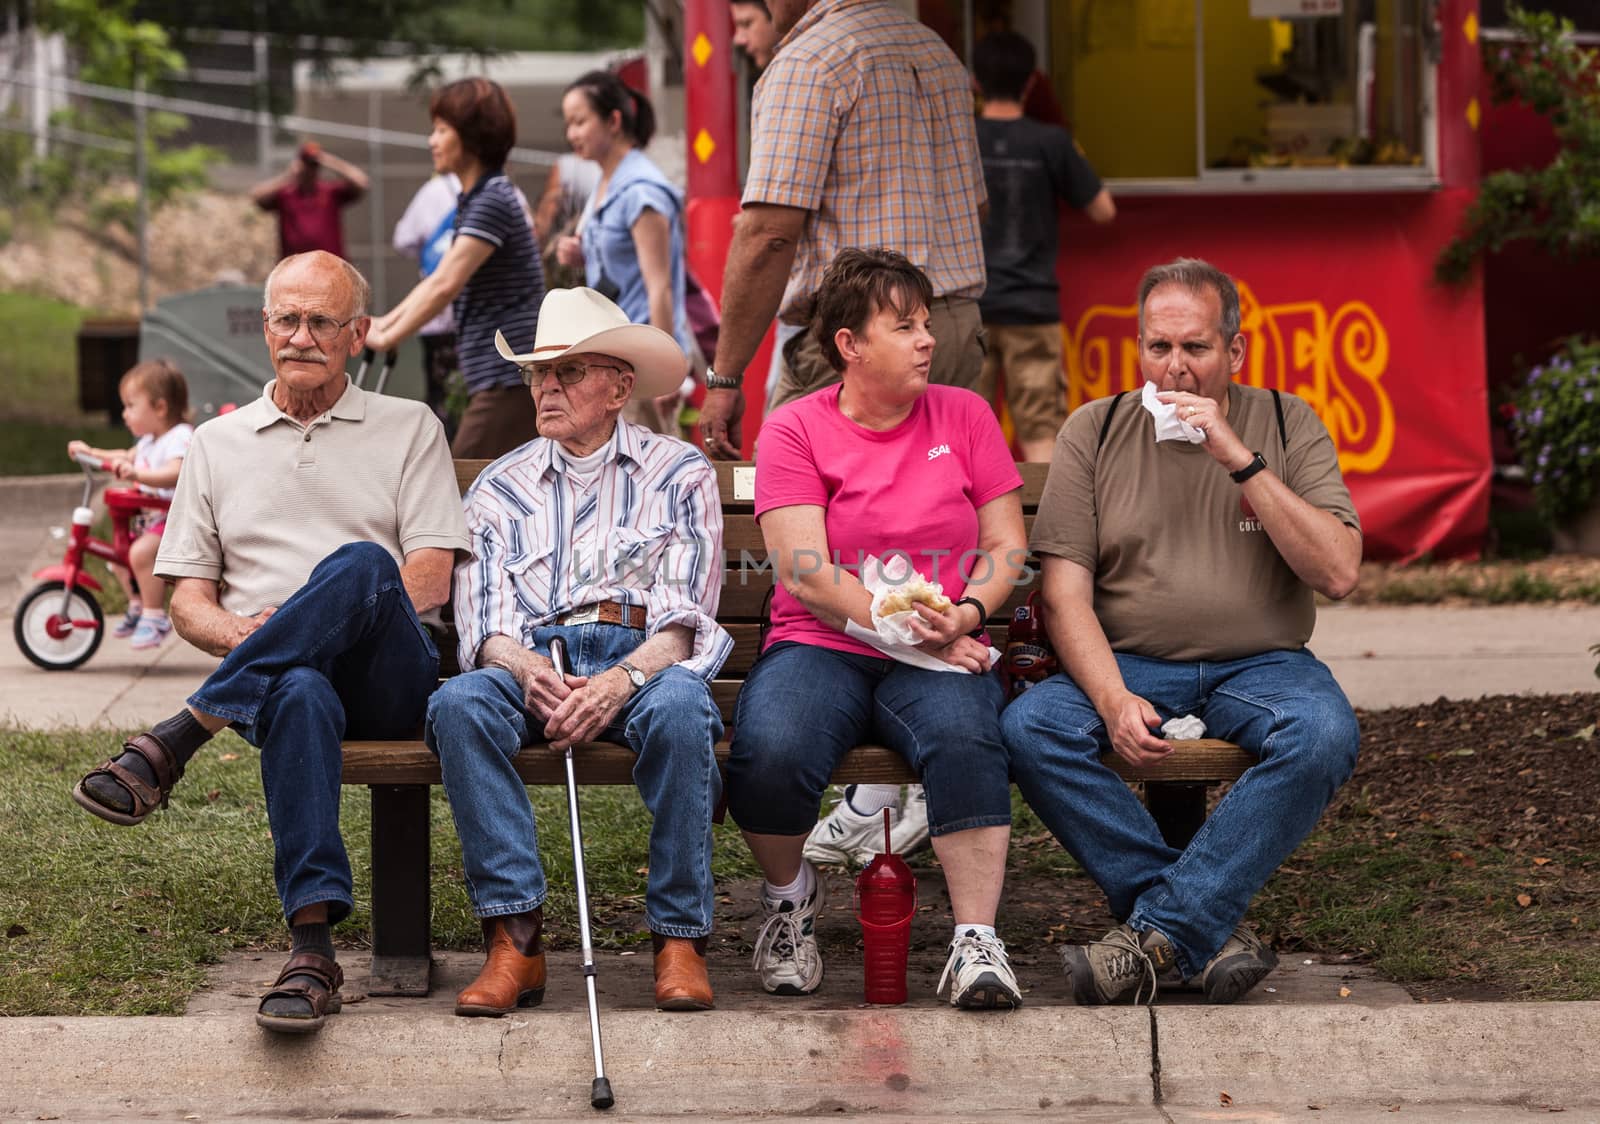 People eating at the Iowa State Fair by Creatista